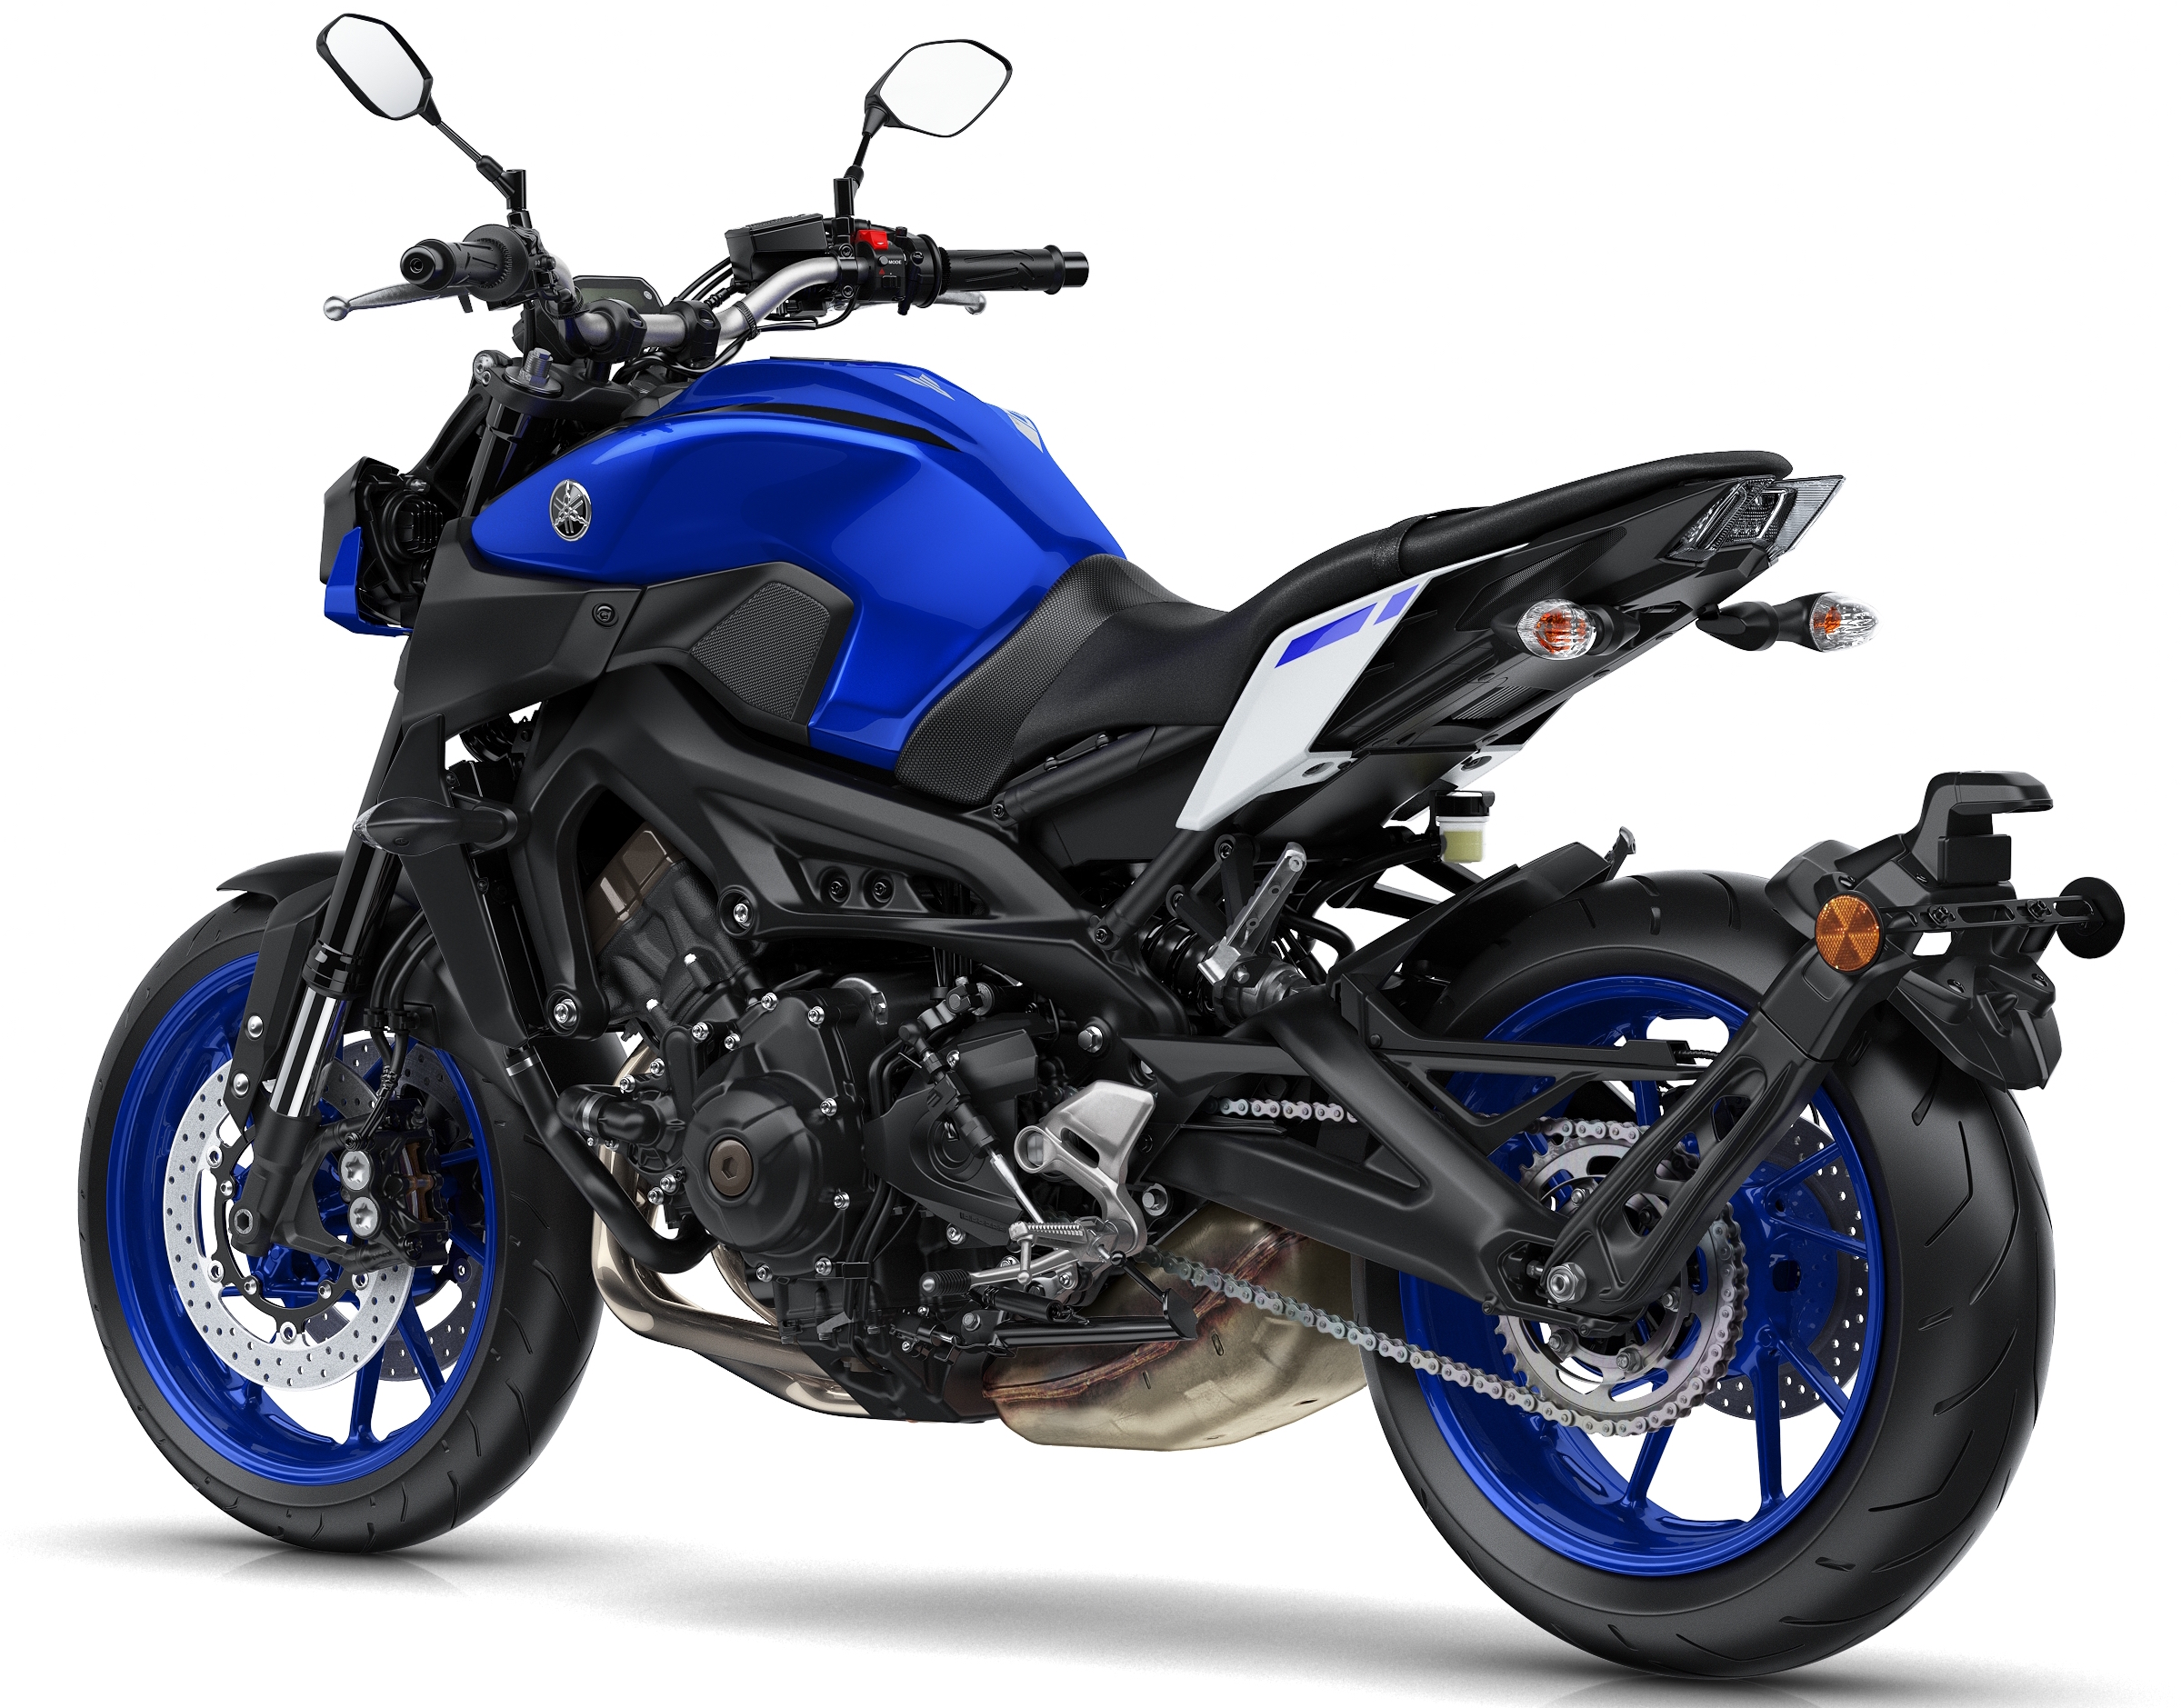 2017 Yamaha Mt 09 Updated For The New Year Now With Led Lights